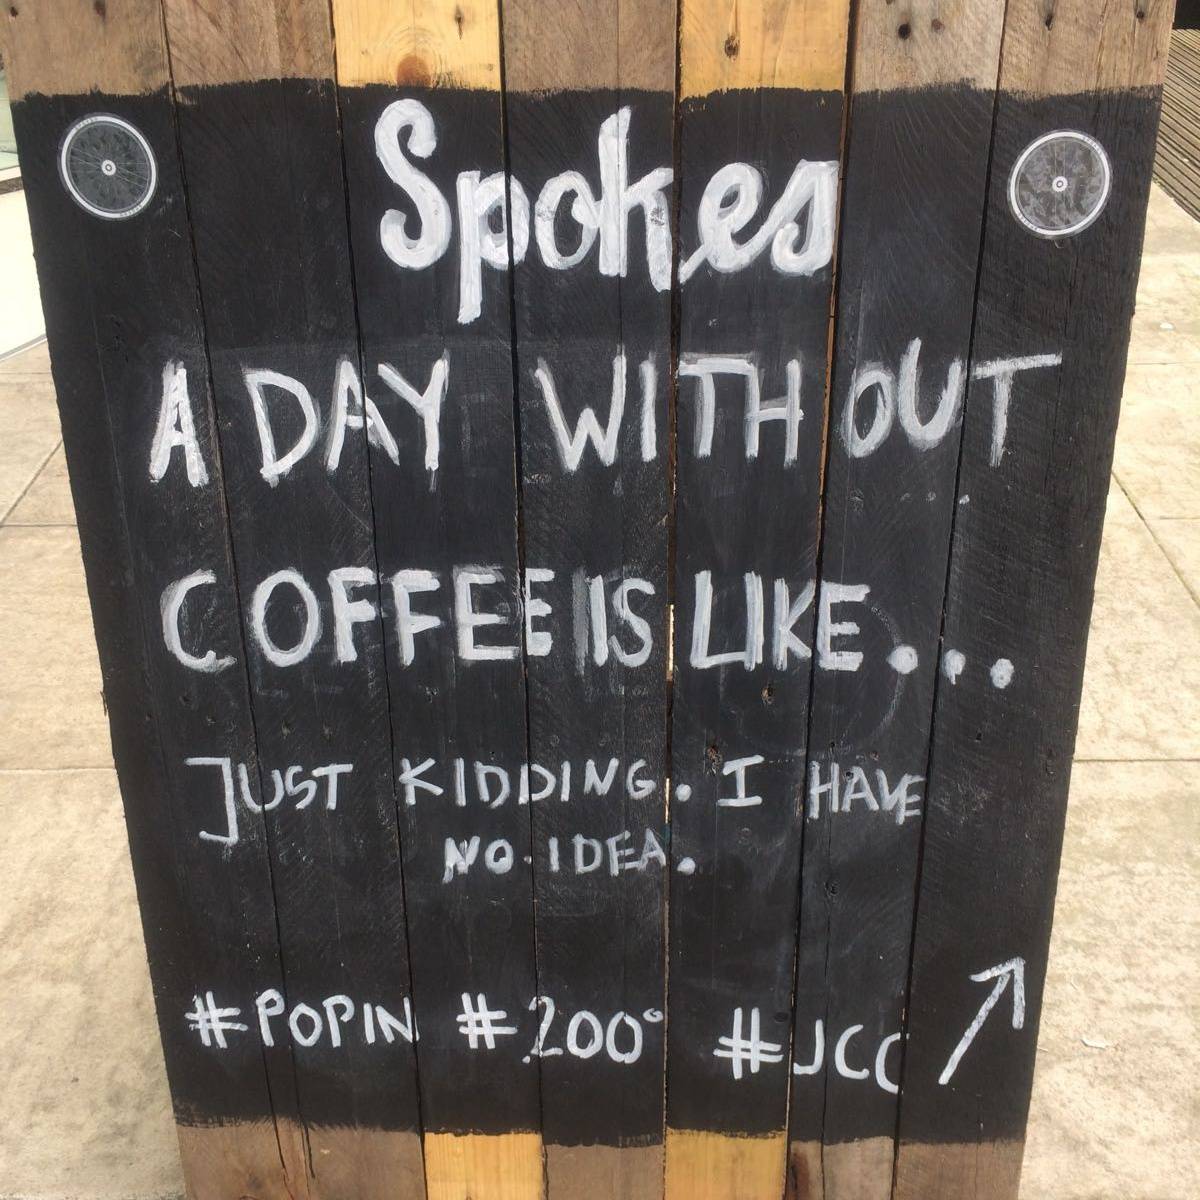 Hush your mouth, don't scare people like that!
😥☕
#coffee #saturdaylife #hangover #lovenotts #nottingham